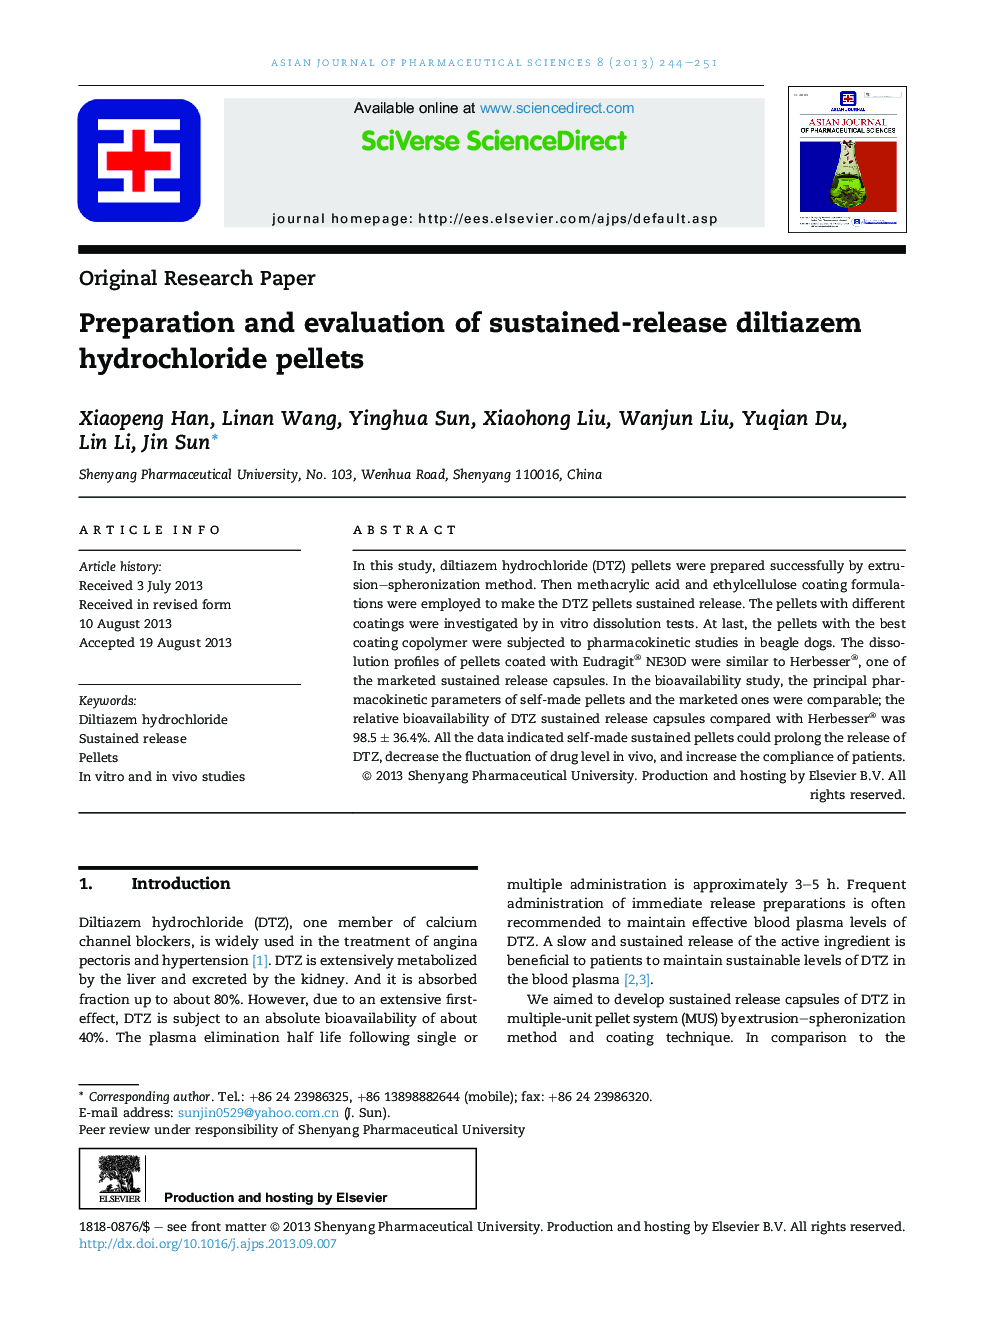 Preparation and evaluation of sustained-release diltiazem hydrochloride pellets 